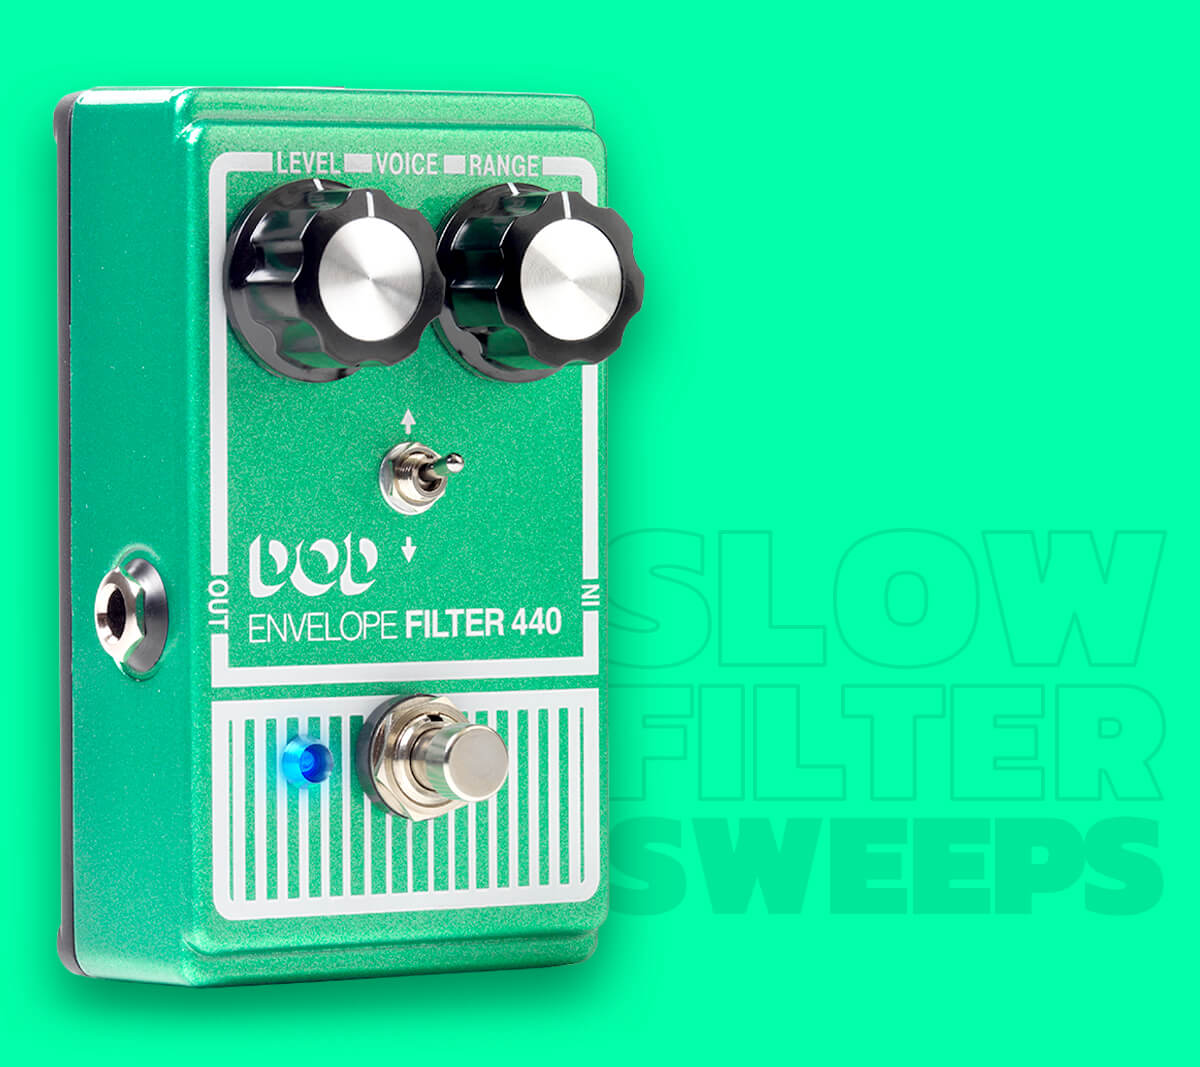 DOD Envelope Filter 440 guitar pedal in grainy green with white graphics, green background and graphics that says 